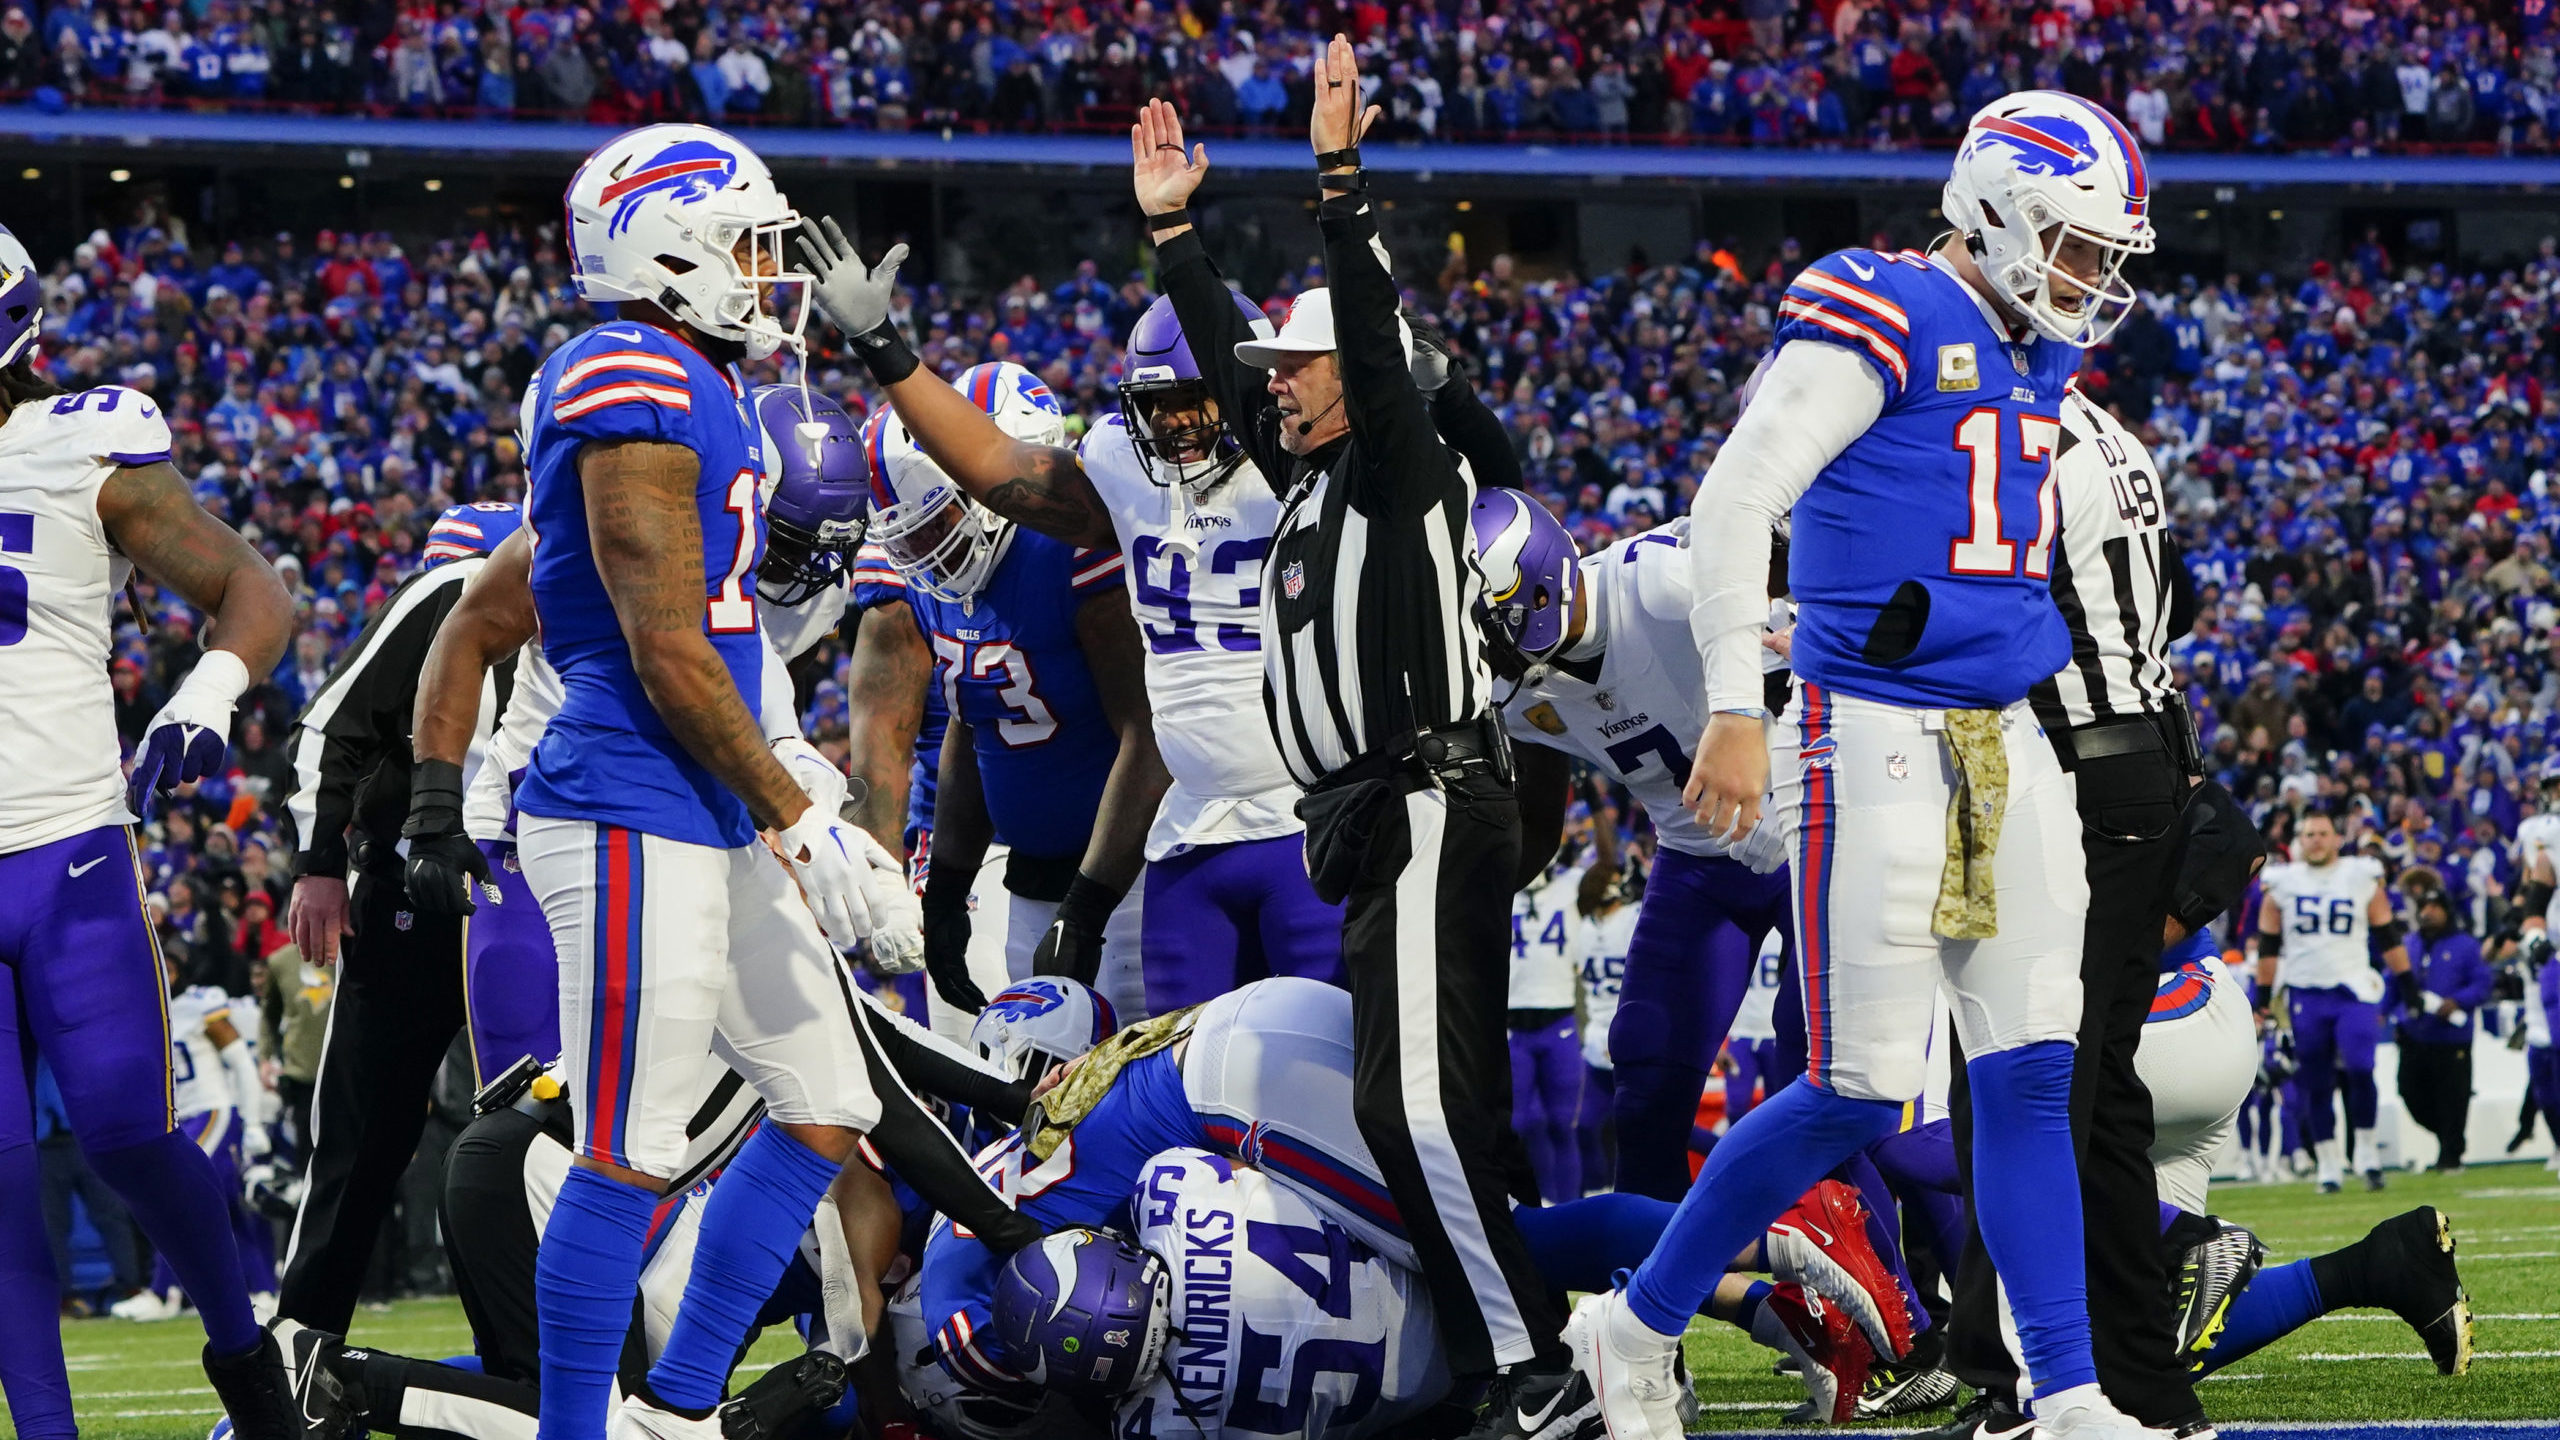 Game of the Year: Recapping Vikings’ Stunning Victory OT Over Bills